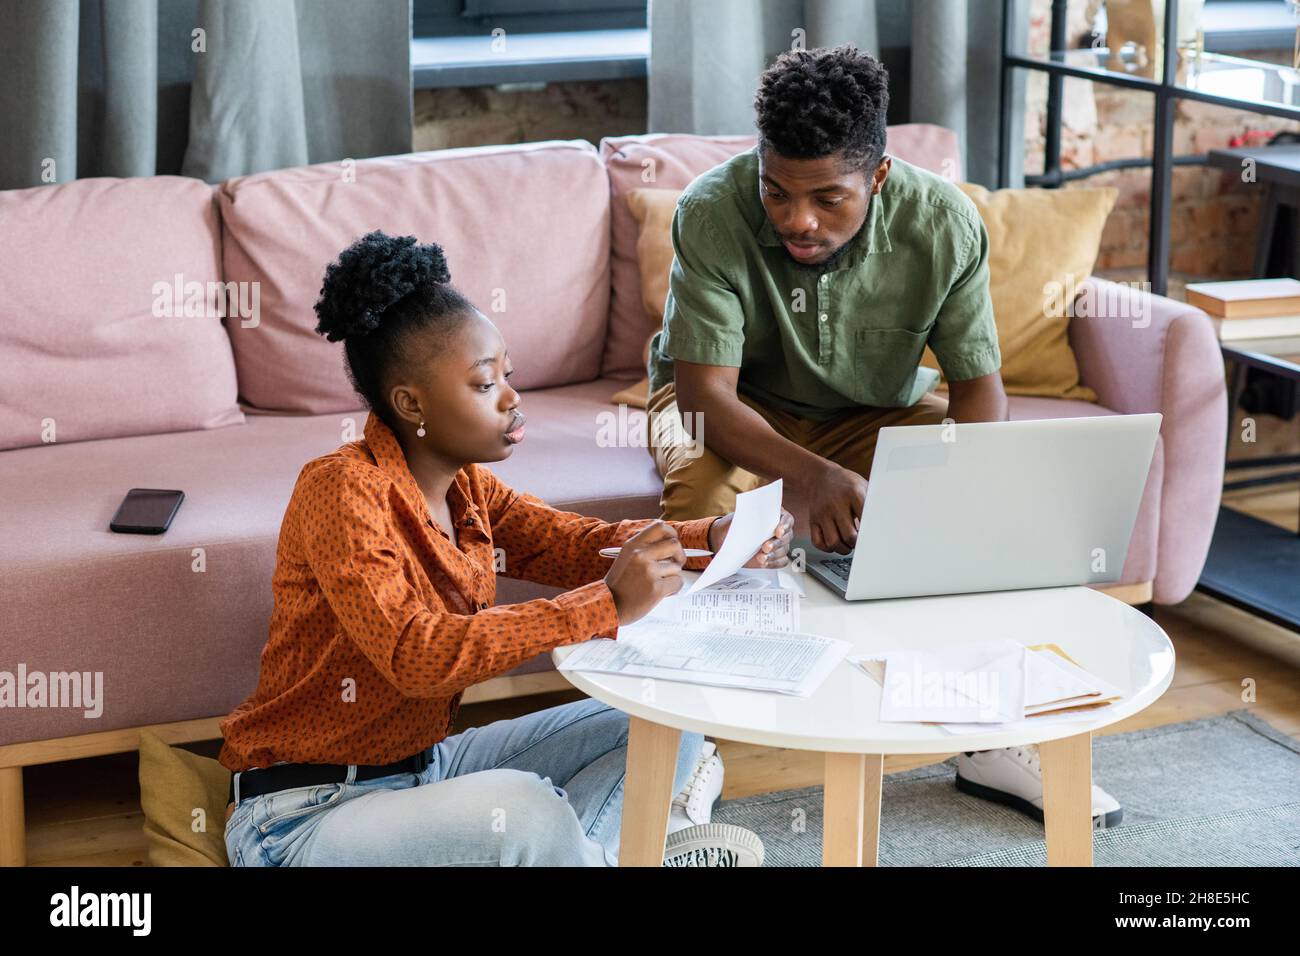 Serious young African American couple sitting at coffee table with papers and laptop and discussing finances Stock Photo